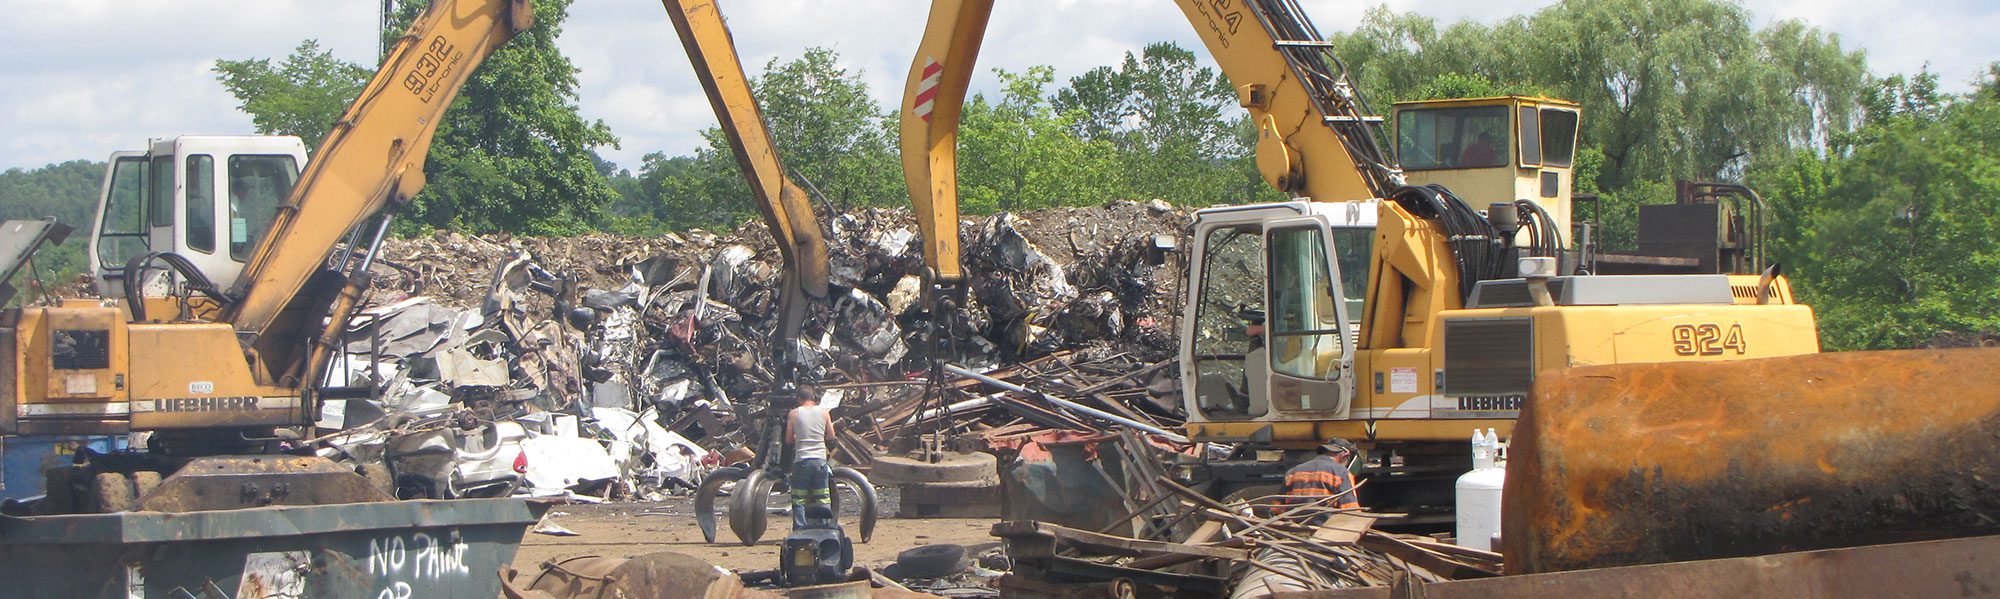 Cash for scrap metal recycling services in Fairmont, WV